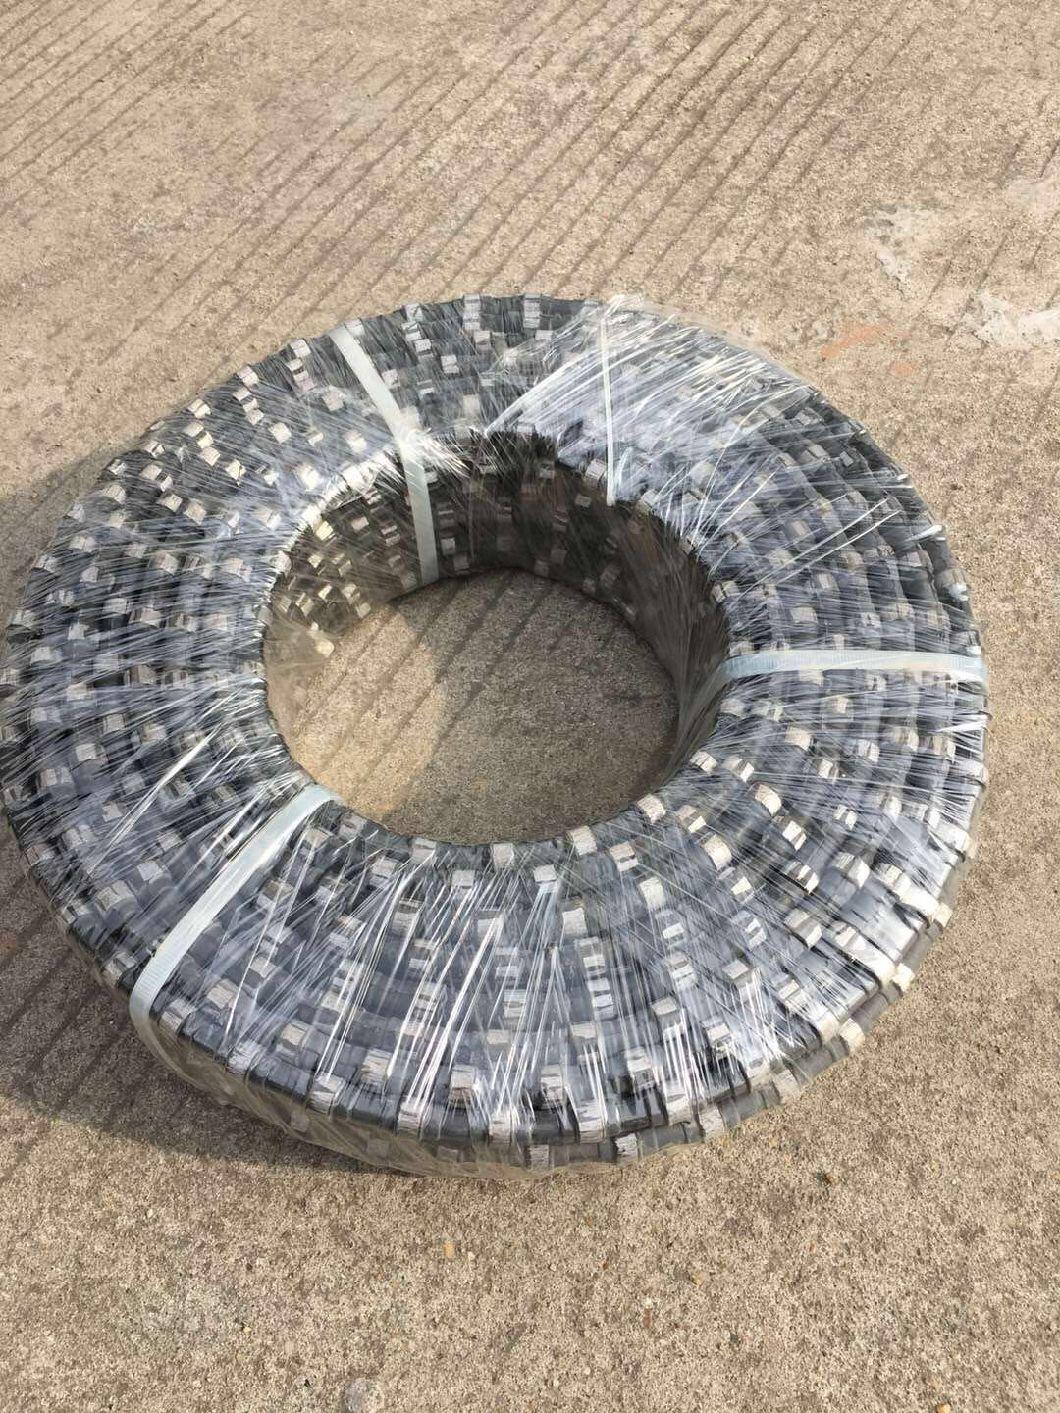 Durable High Speed Stone Tools Diamond Wire Saw for Granite Marble Mining Machine Cutting